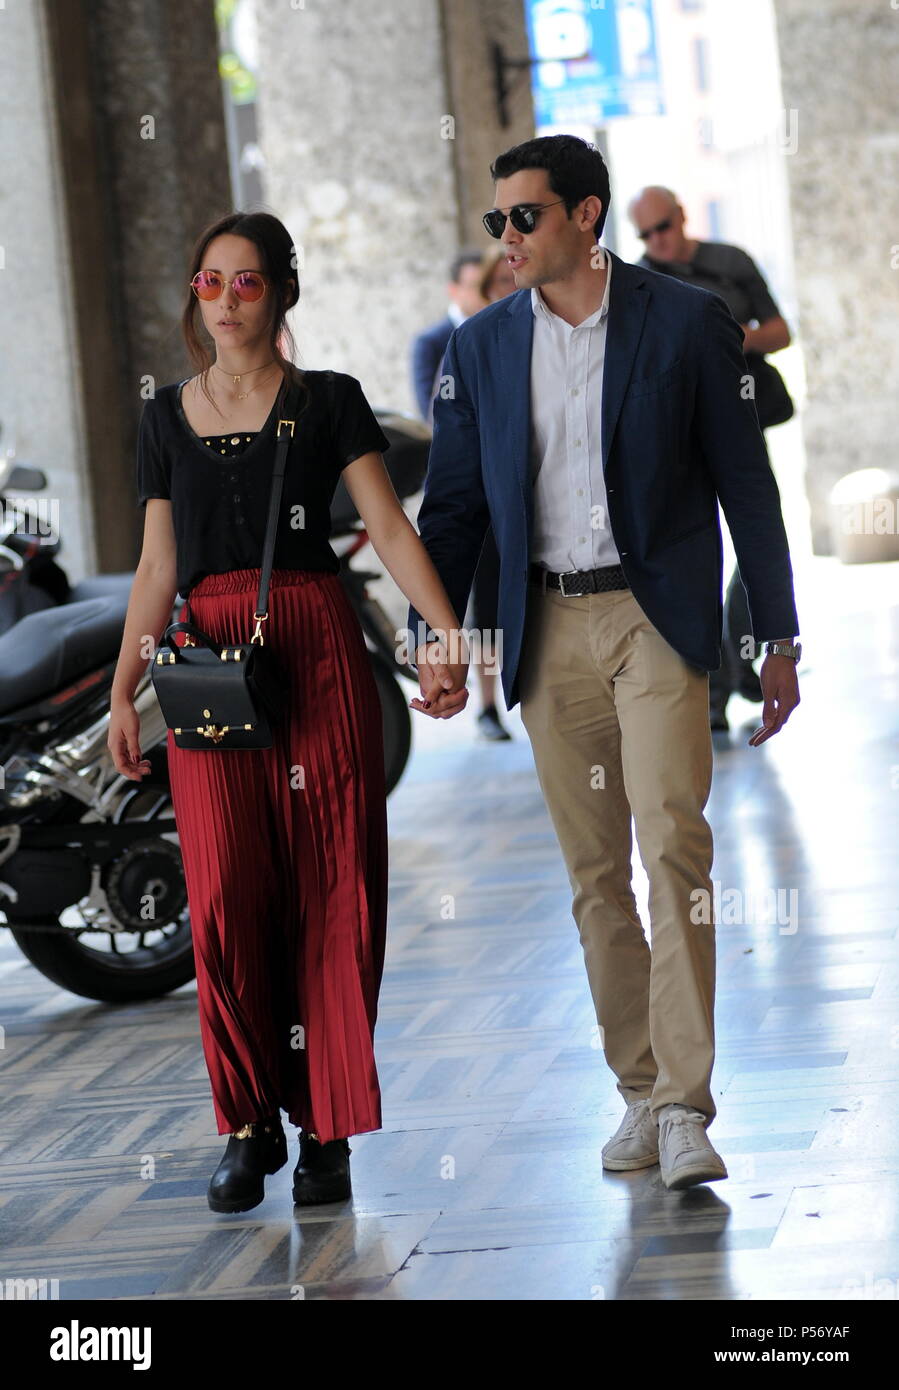 Aurora Ramazzotti and her boyfriend Goffredo Cerza out and about in Milan  Featuring: Aurora Ramazzotti, Goffredo Cerza Where: Milan, Italy When: 25  May 2018 Credit: IPA/WENN.com **Only available for publication in UK,